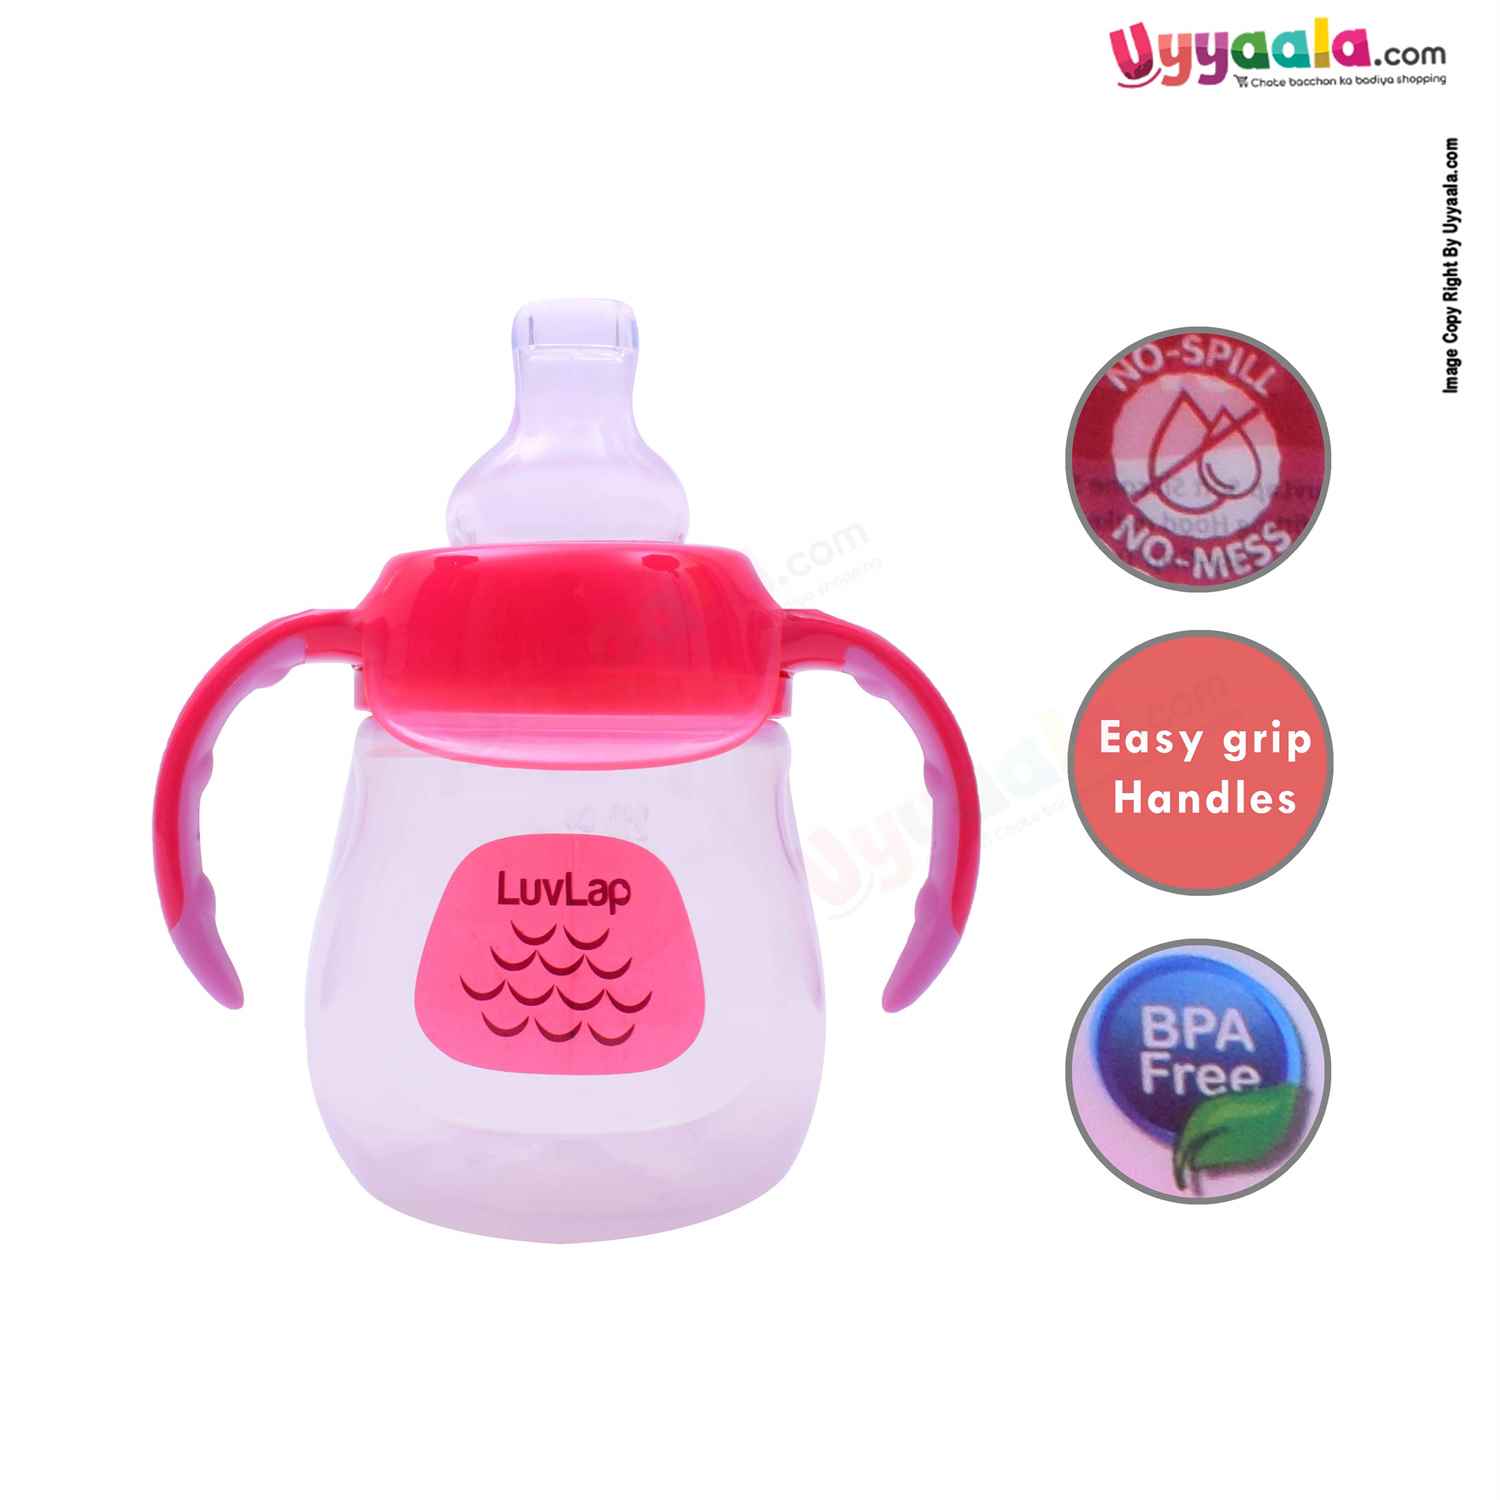 LUVLAP Wispers owl Spout Sipper Cup with Easy Grip Twin Handle Bottle 210 ml 6+m Age - Pink